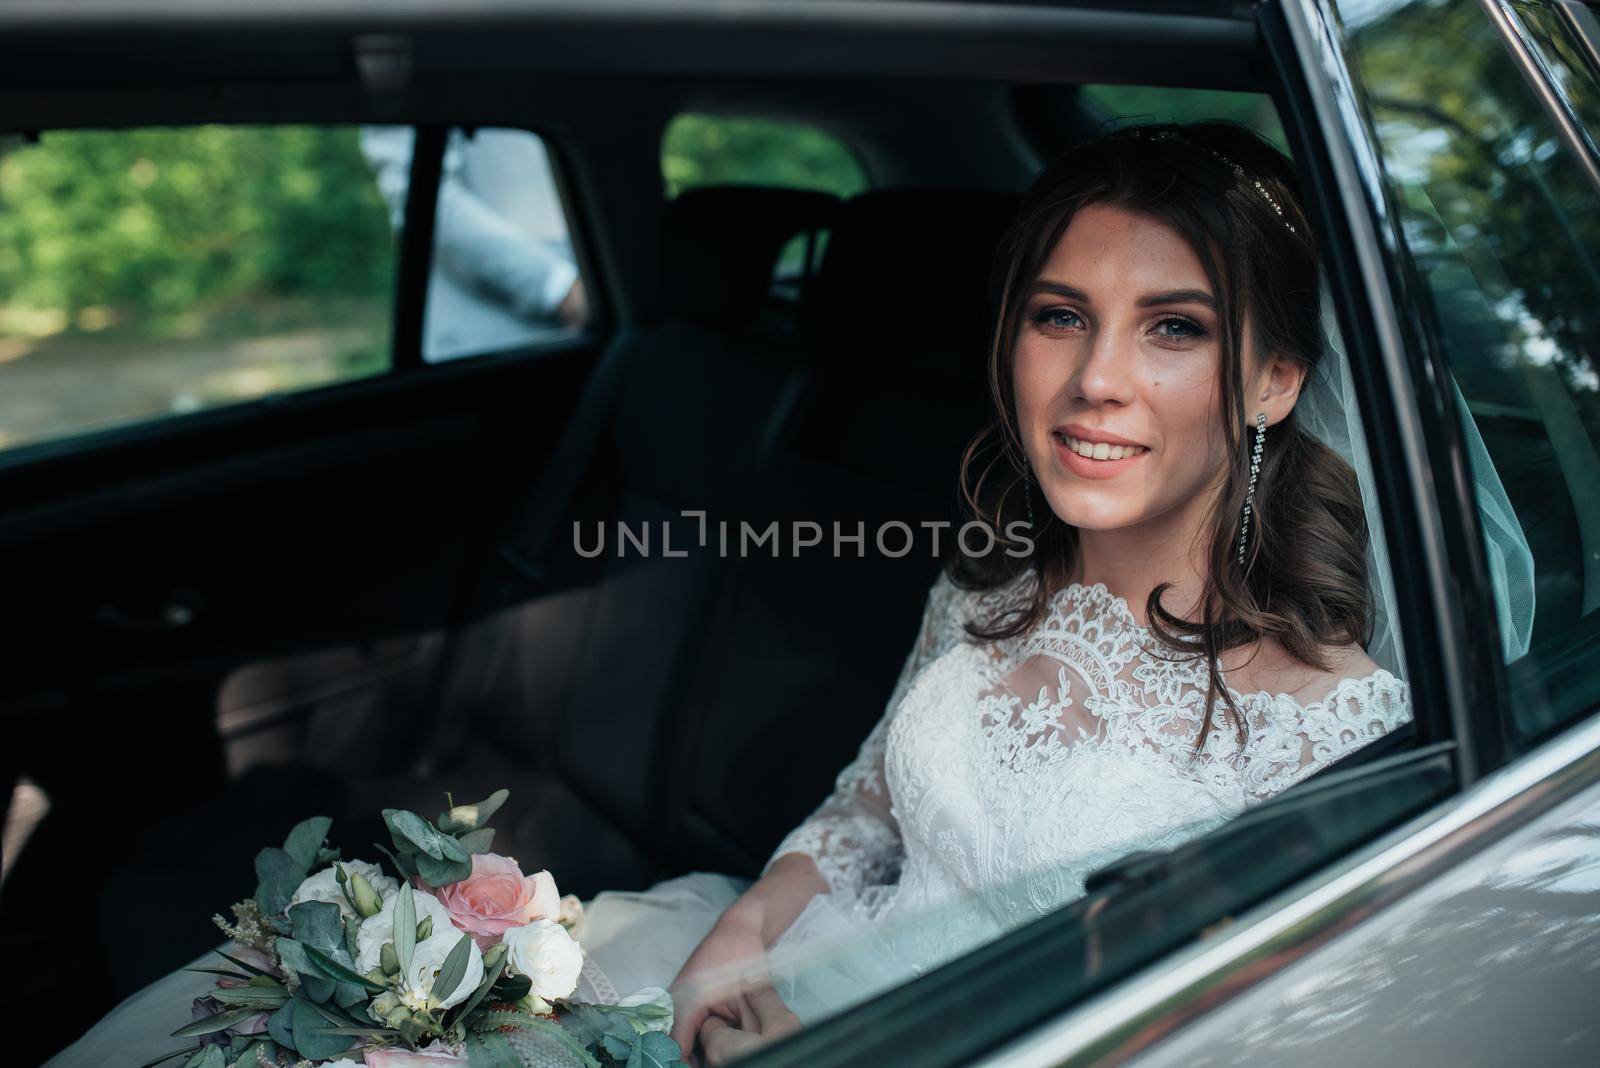 Wedding photo of the bride who is sitting in the car with a bouquet of flowers